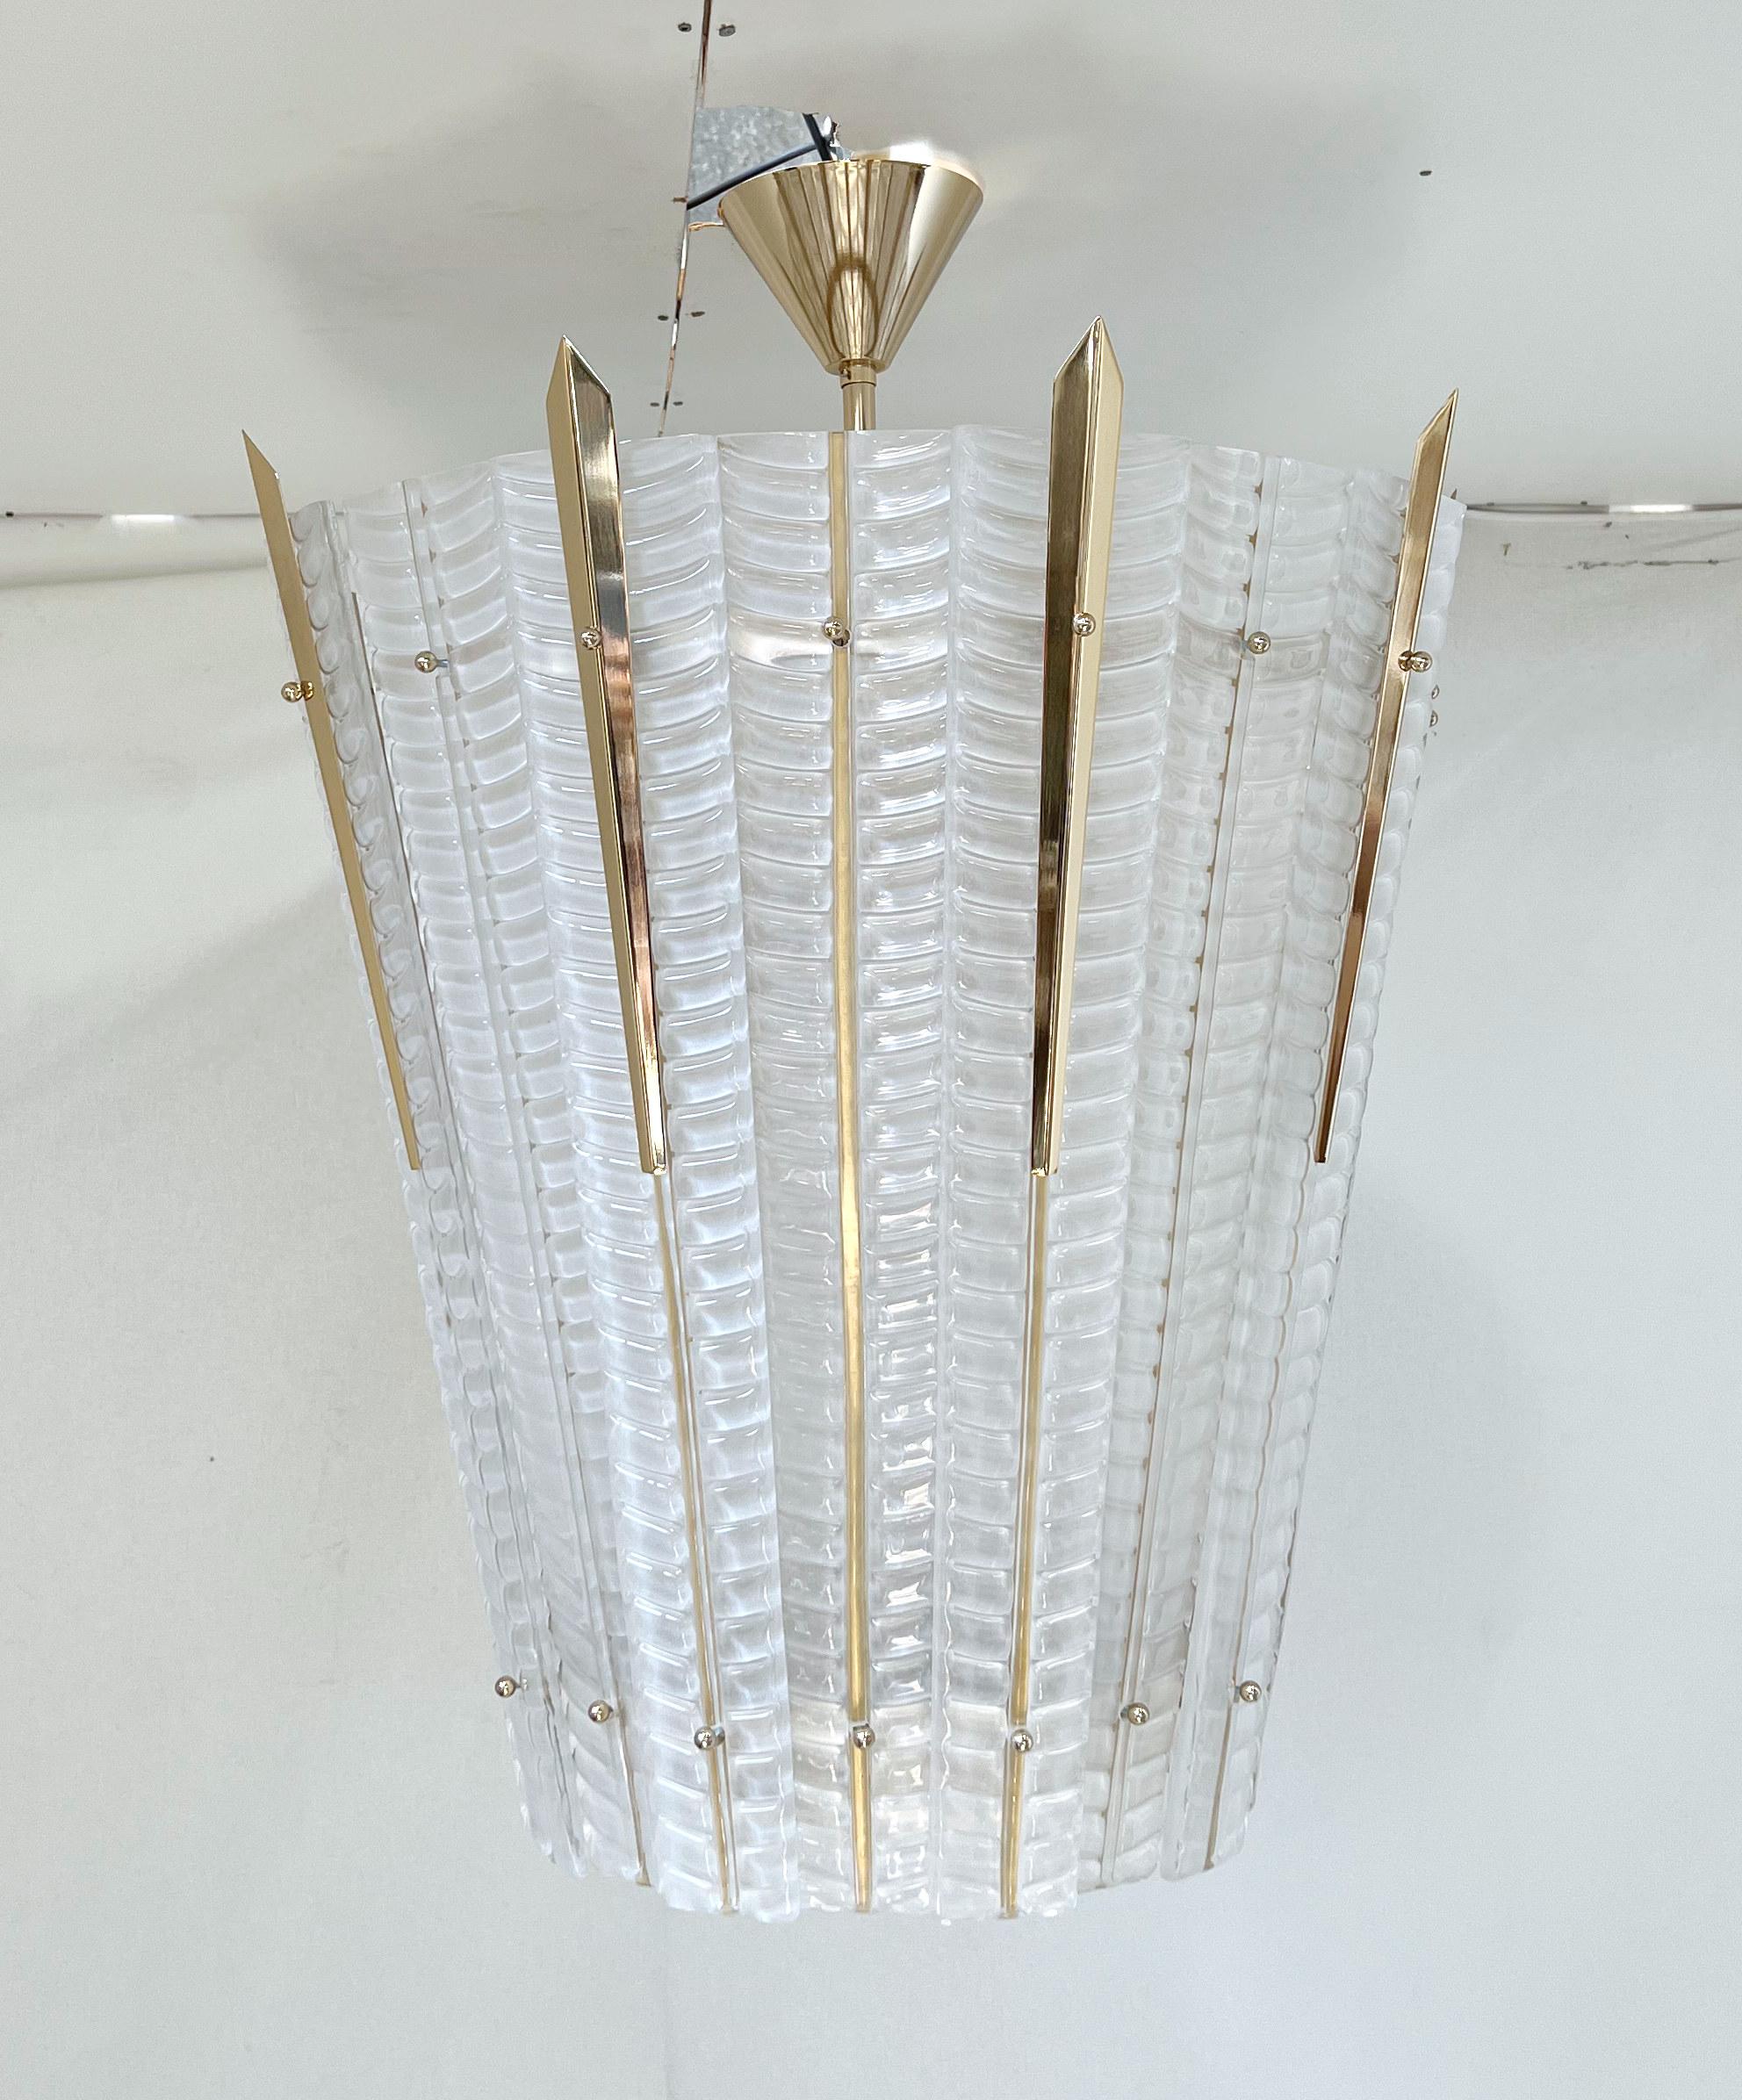 Monumental Italian lantern with frosted Murano glass mounted on gold finish metal frame and details / Designed by Fabio Bergomi for Fabio Ltd / Made in Italy
9 lights / E26 or E27 type / max 60W each
Measures: Diameter 28 inches, height 30 inches,